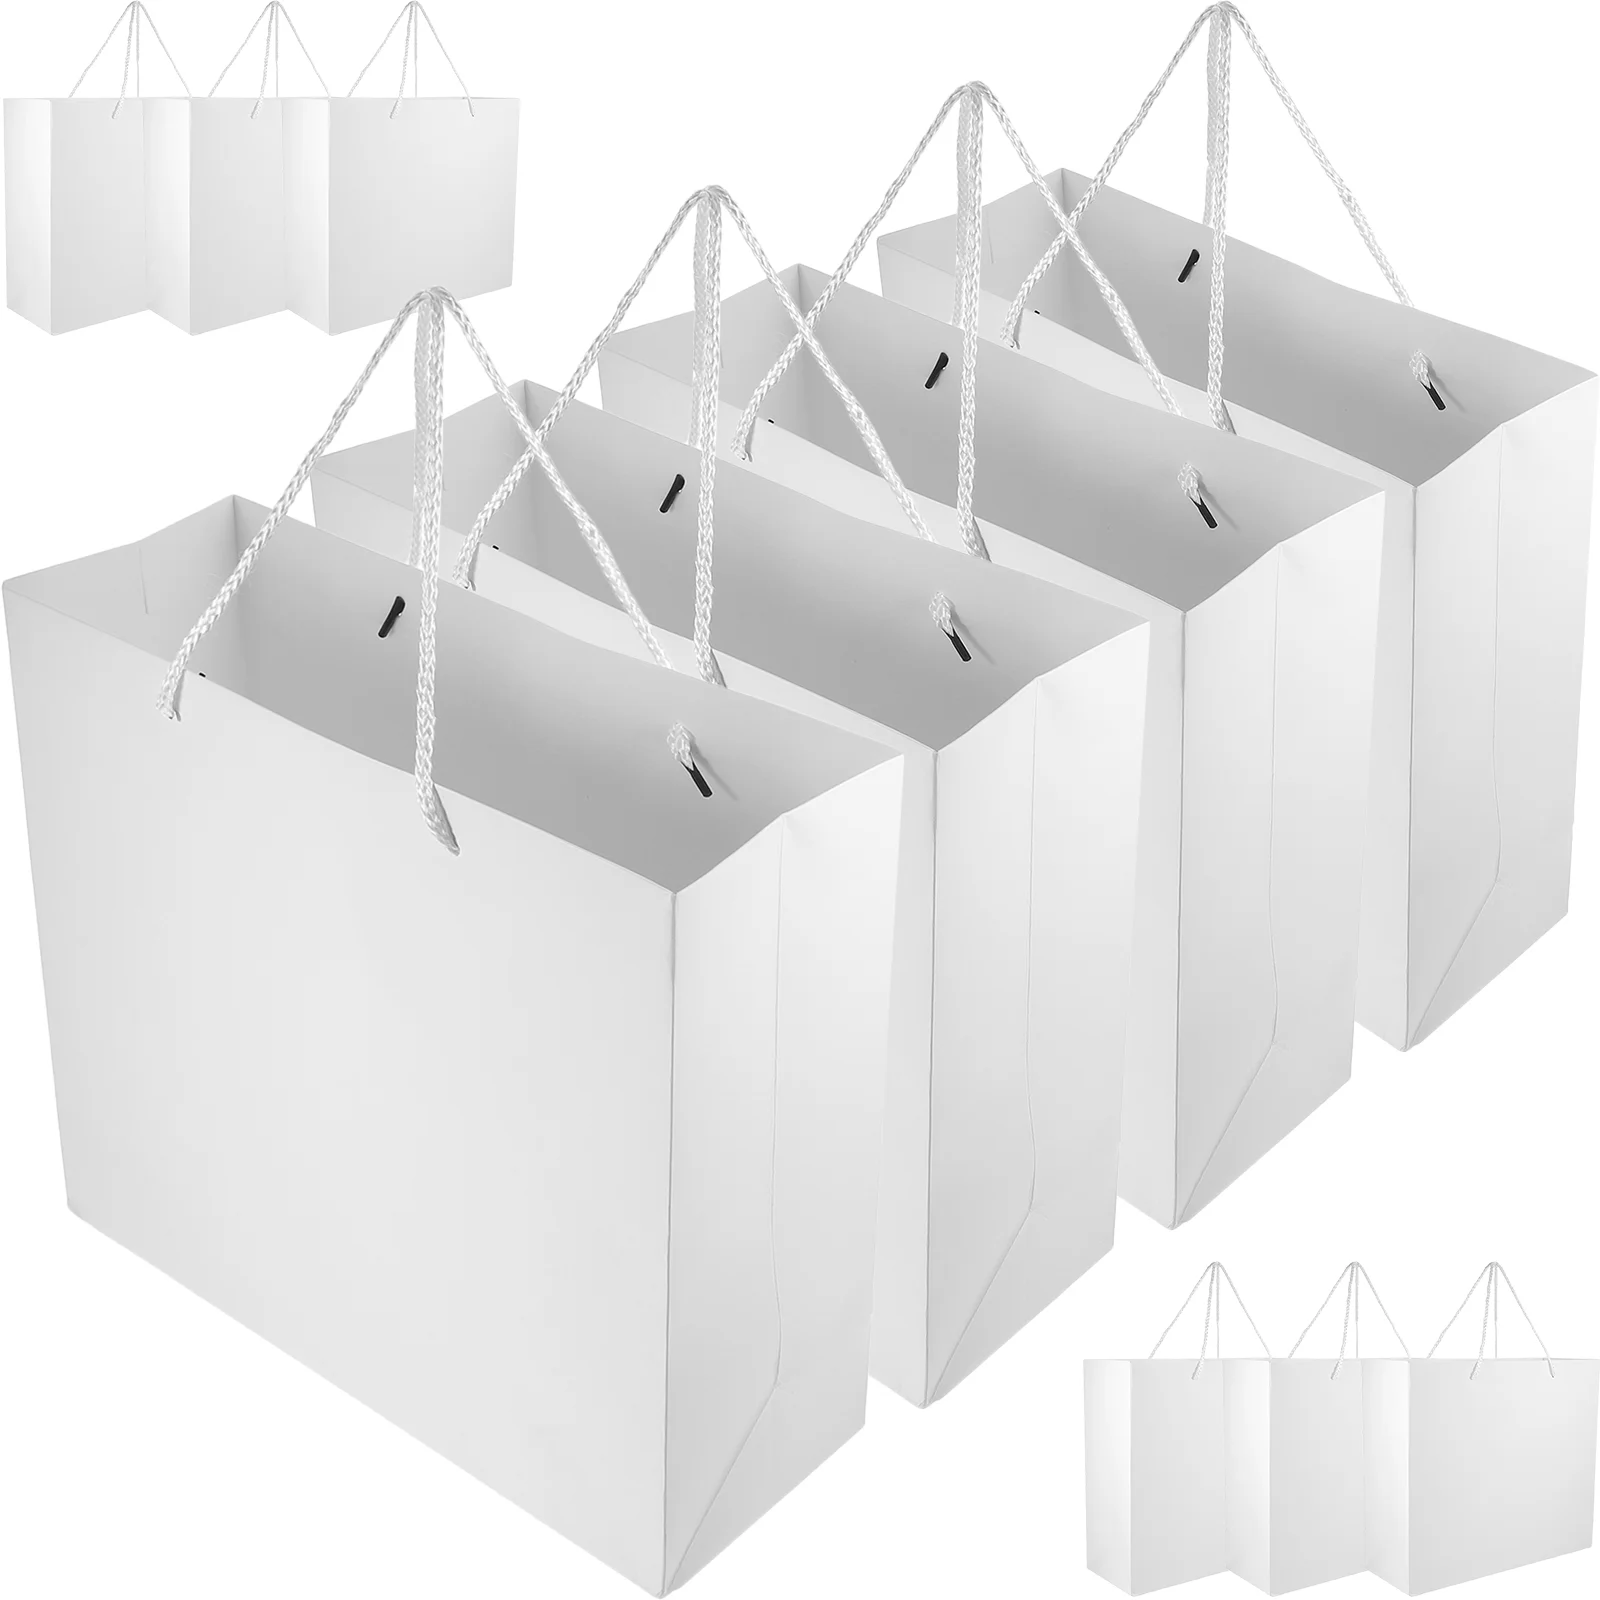 

10 Pcs Gift Wrapping Paper Bag White Bags Birthday Party Supplies Handles Bulk Goodie Favors Shopping